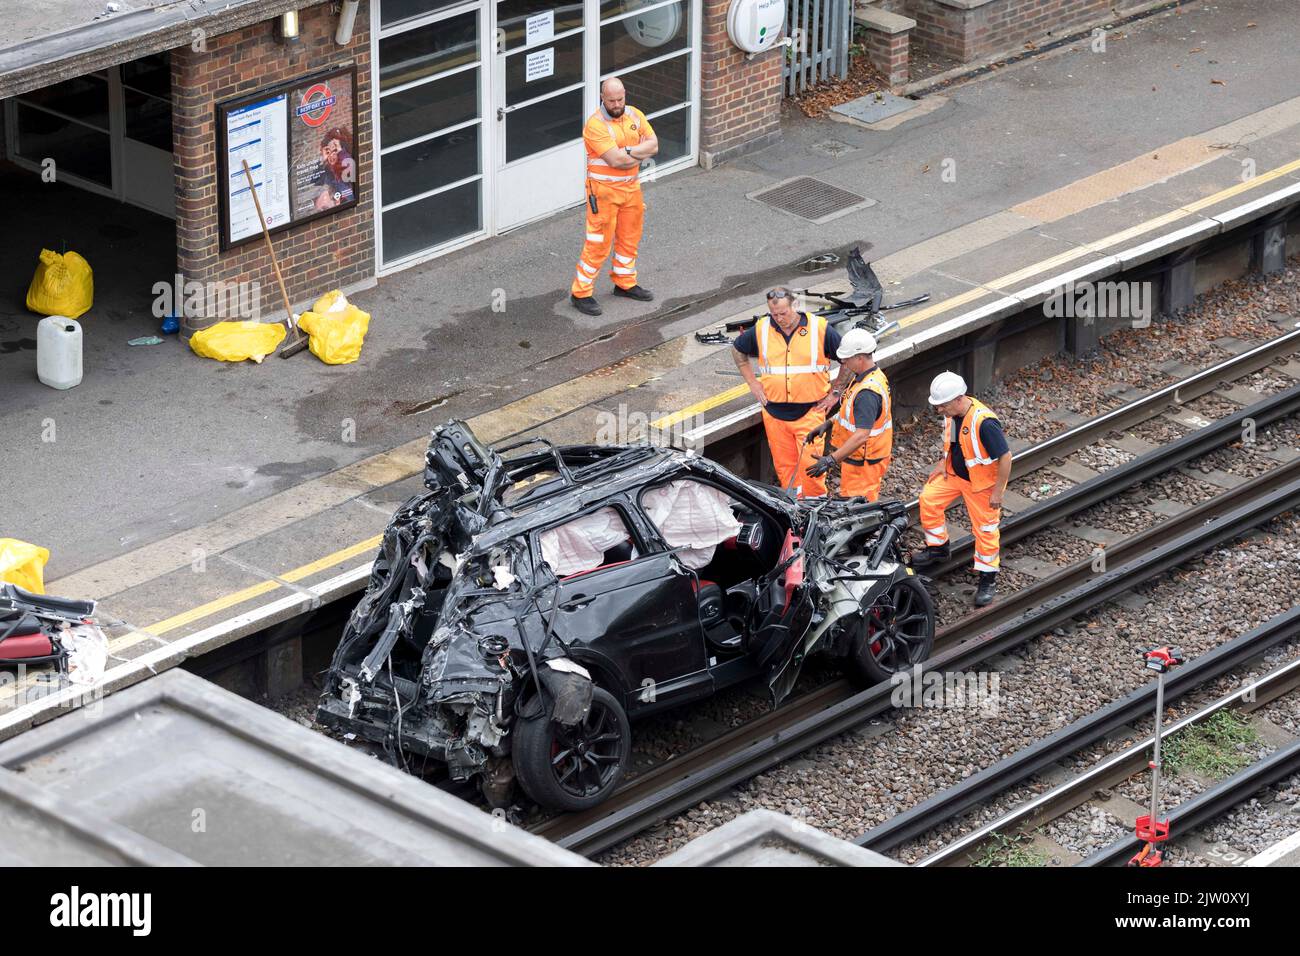 A range rover crashed into a tesla in a tesla test centre near Park Royal underground station. The debris of the range rover remains on the tracks of Stock Photo